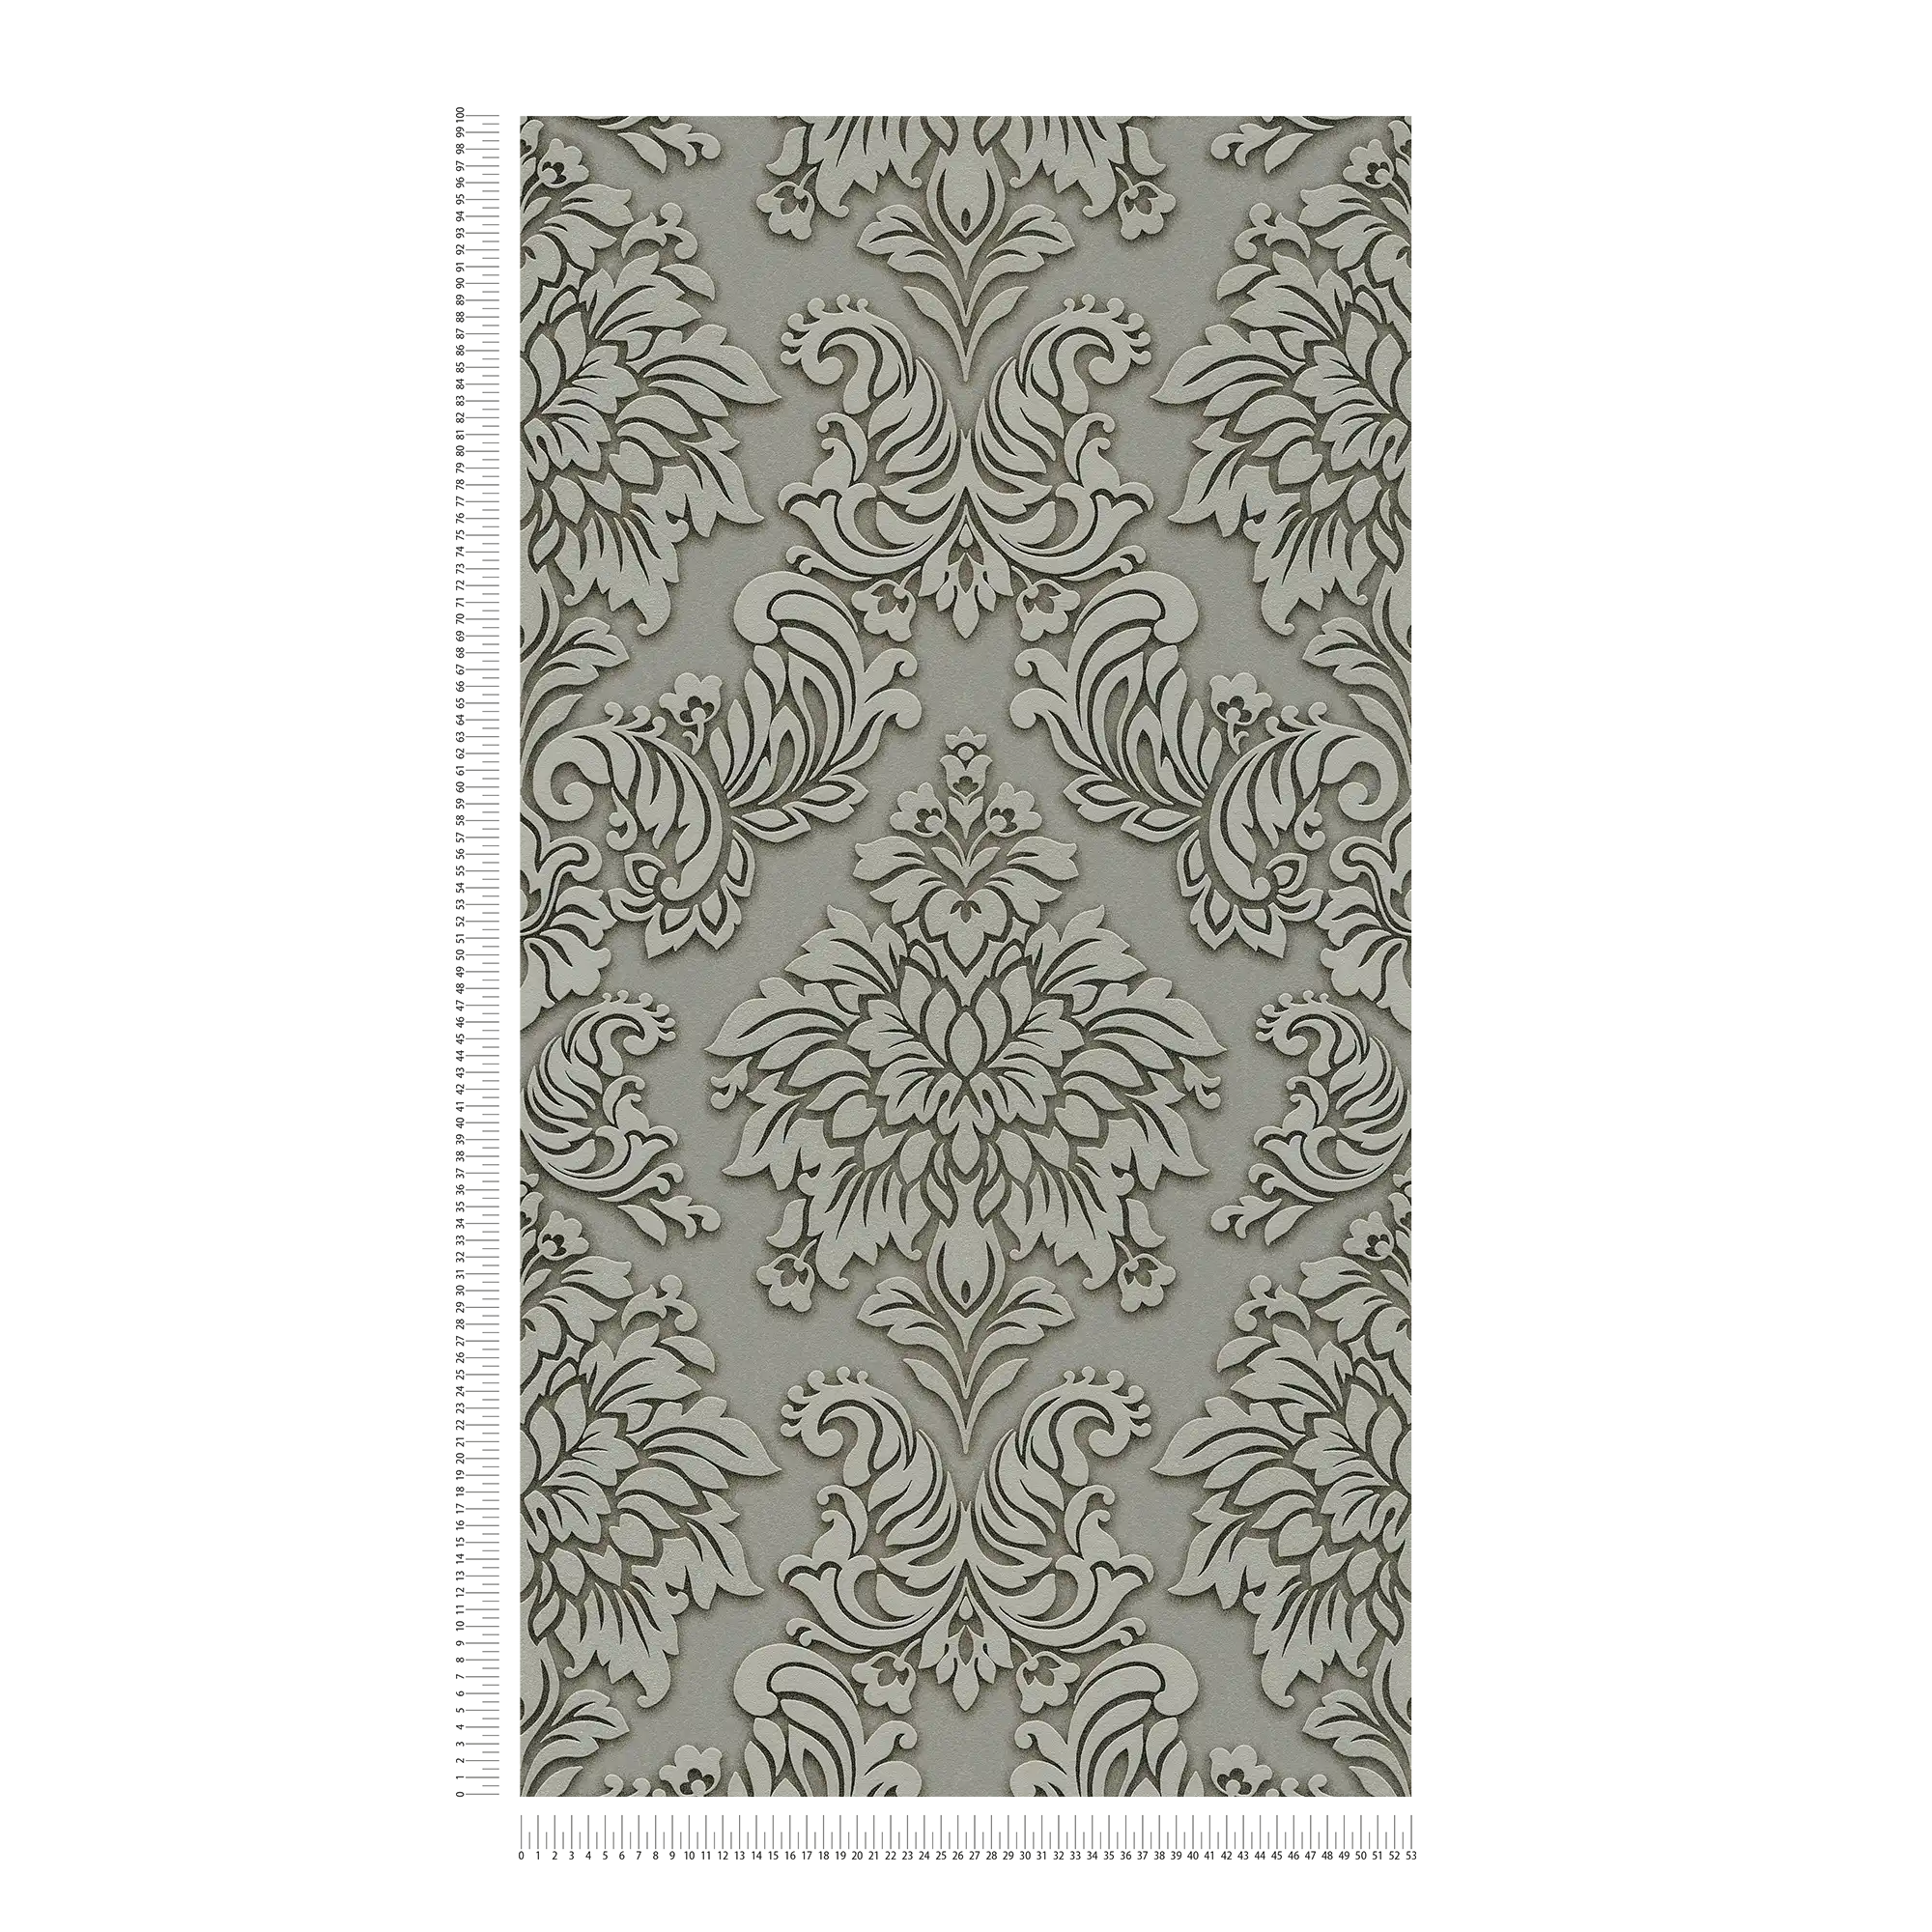             Baroque wallpaper ornaments with glitter effect - grey, silver, beige
        